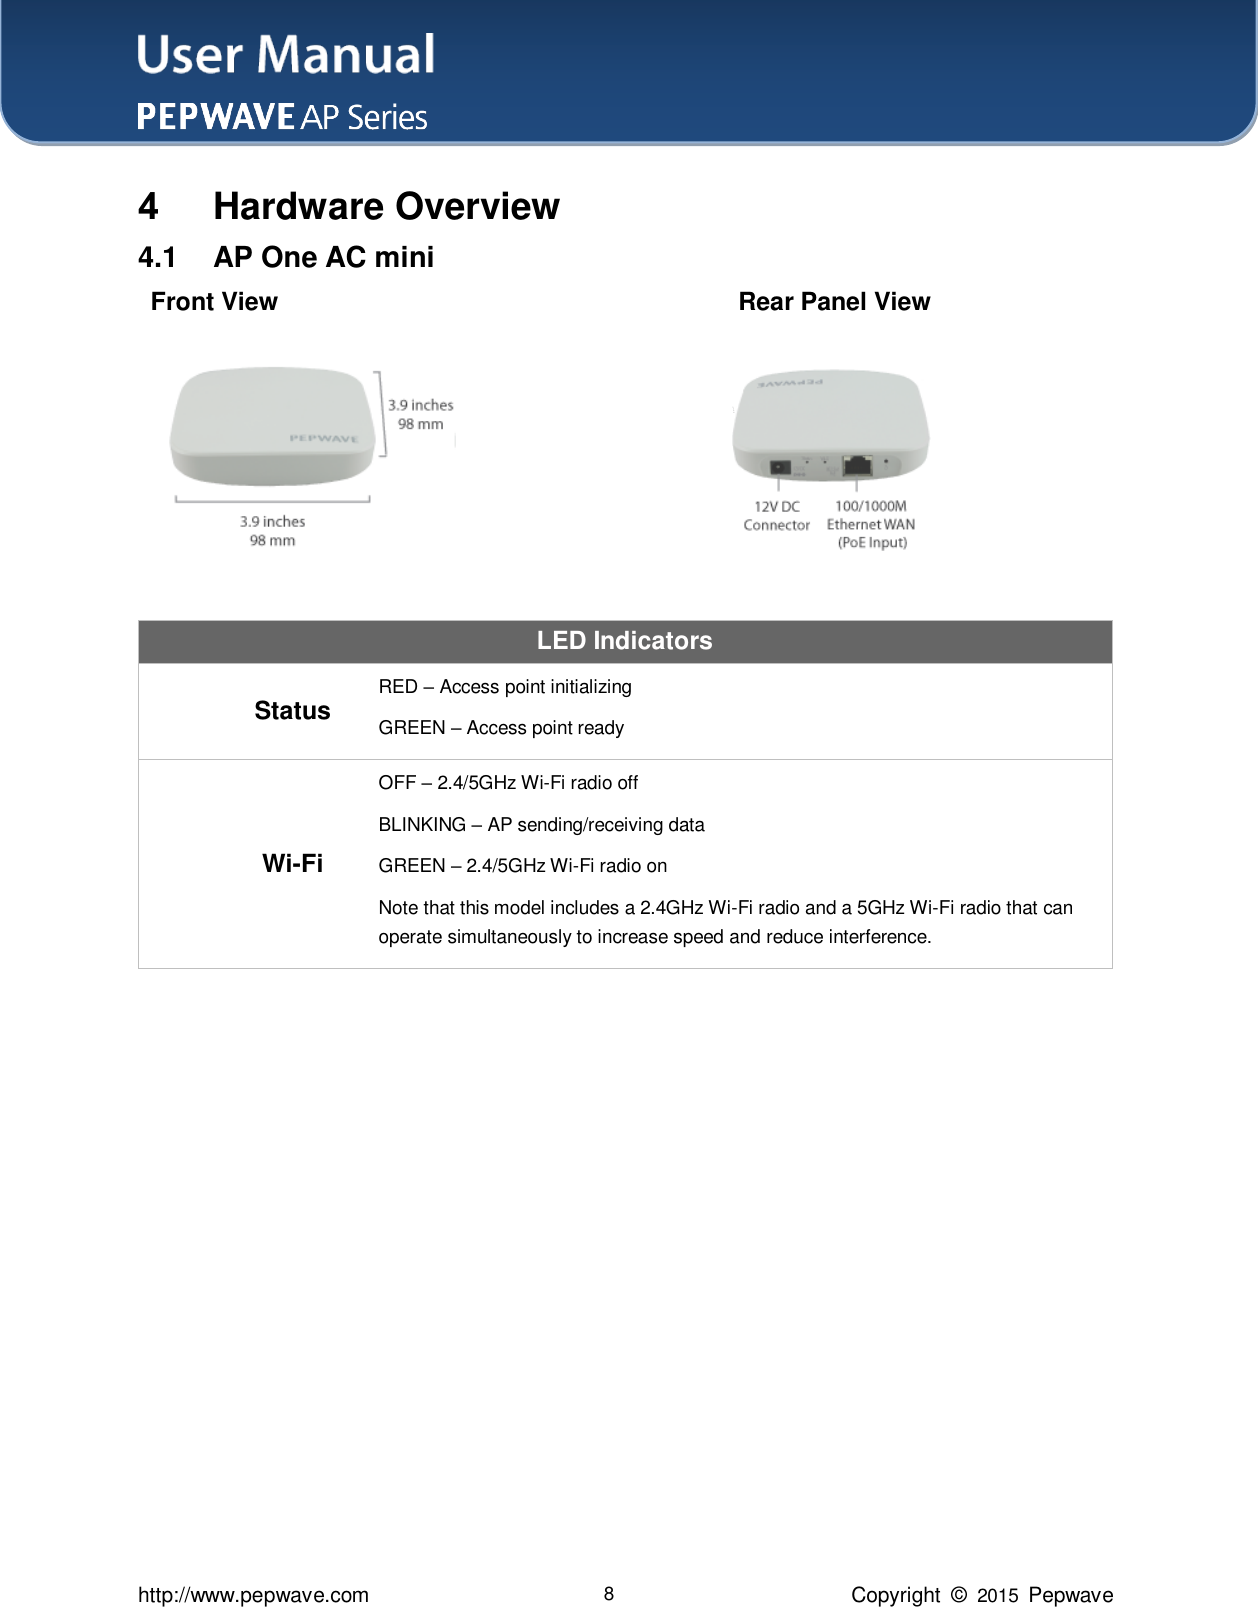 User Manual    http://www.pepwave.com 8 Copyright  ©  2015  Pepwave 4 Hardware Overview 4.1  AP One AC mini  Front View          Rear Panel View        LED Indicators   Status RED – Access point initializing GREEN – Access point ready  Wi-Fi OFF – 2.4/5GHz Wi-Fi radio off BLINKING – AP sending/receiving data GREEN – 2.4/5GHz Wi-Fi radio on Note that this model includes a 2.4GHz Wi-Fi radio and a 5GHz Wi-Fi radio that can operate simultaneously to increase speed and reduce interference.   